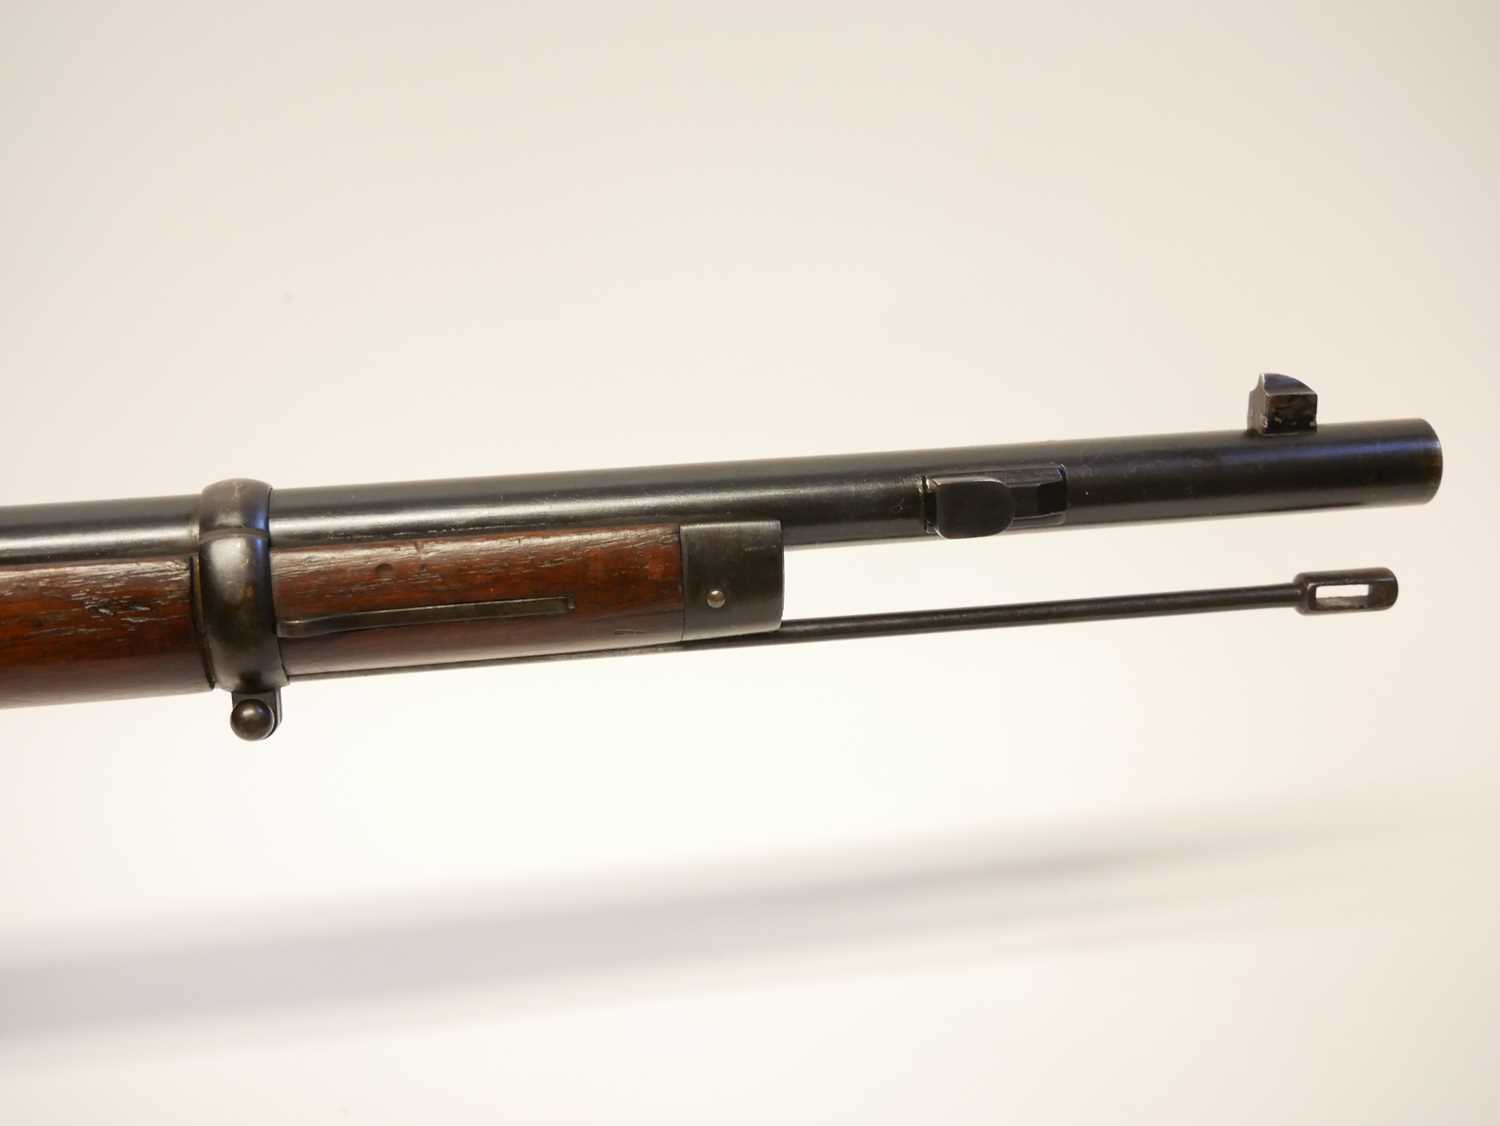 Italian Vetterli M.1870/87 10.35x47R bolt action rifle, serial number 5778, 33.5inch barrel fitted - Image 10 of 17